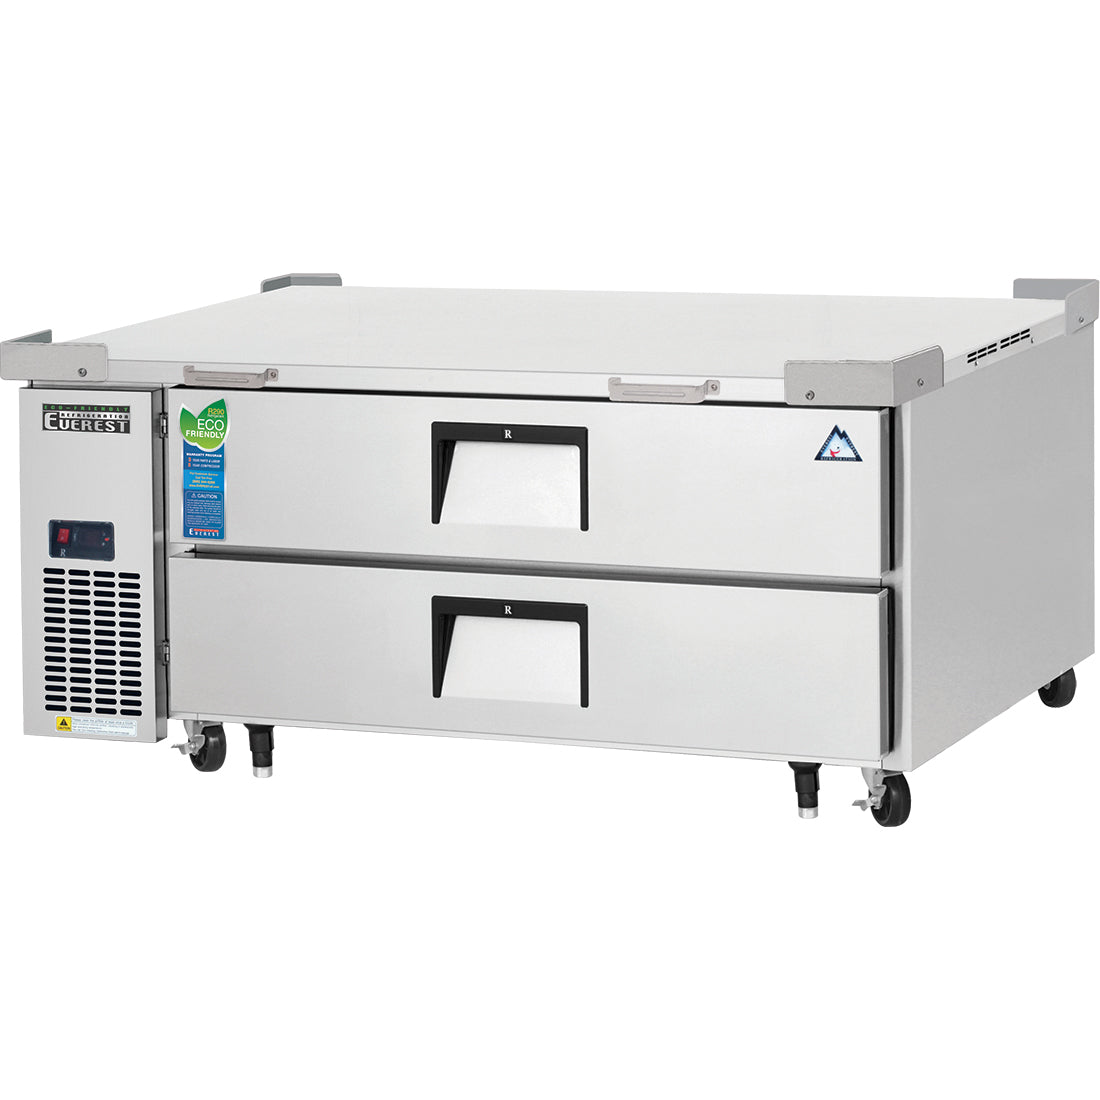 Everest EC Series-ECB52D2 One Section Two Drawer Side Mount Refrigerated Chef Base - 115V